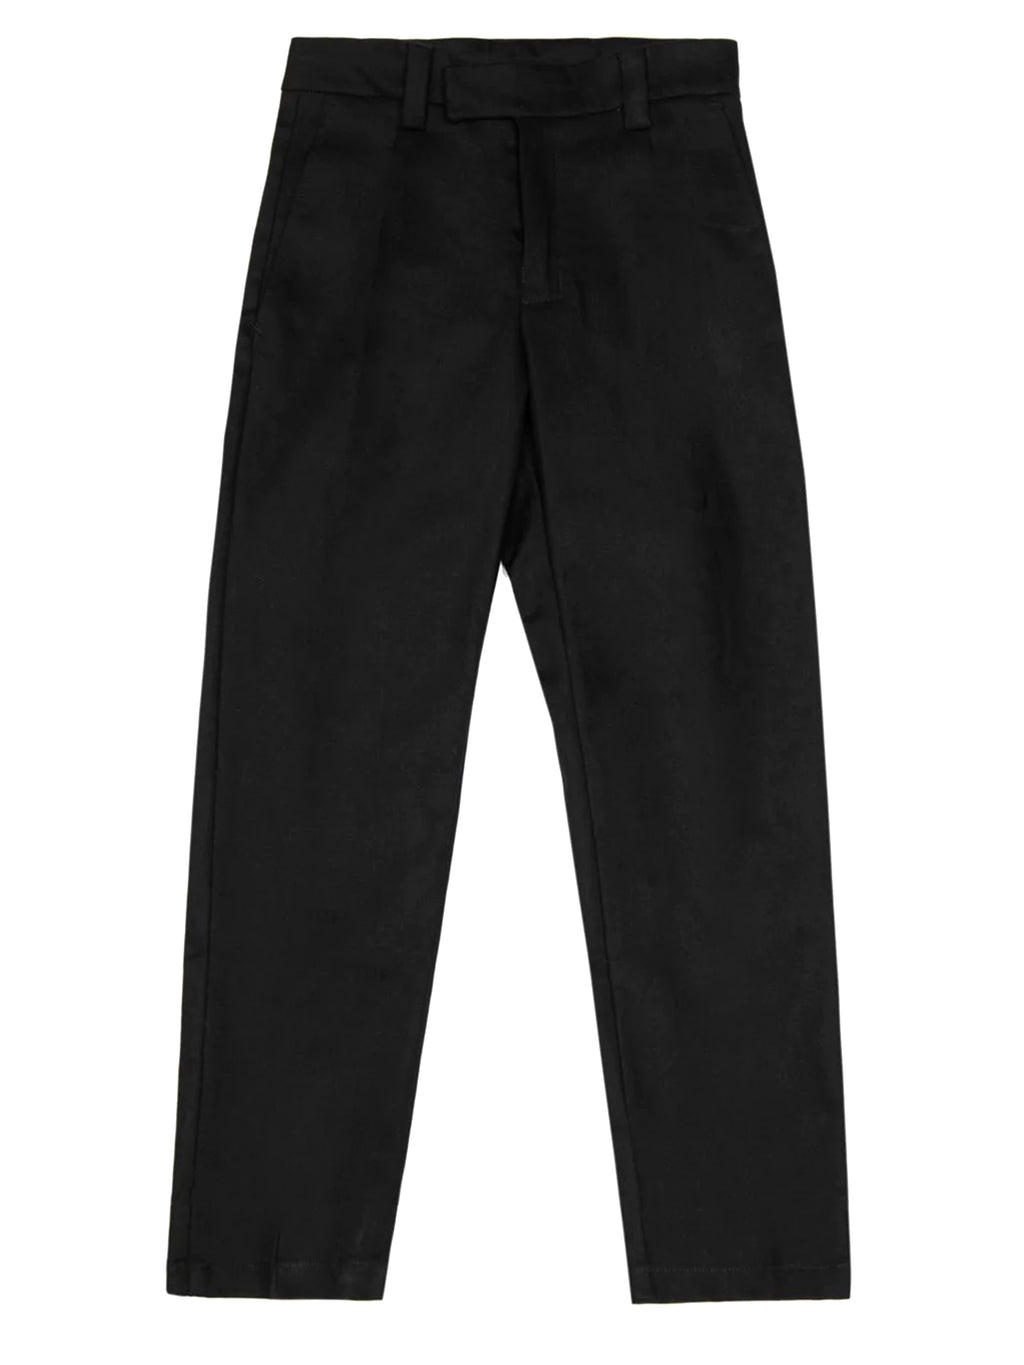 100% Heavyweight Cotton Twill Pants - WELCOME RIVERS